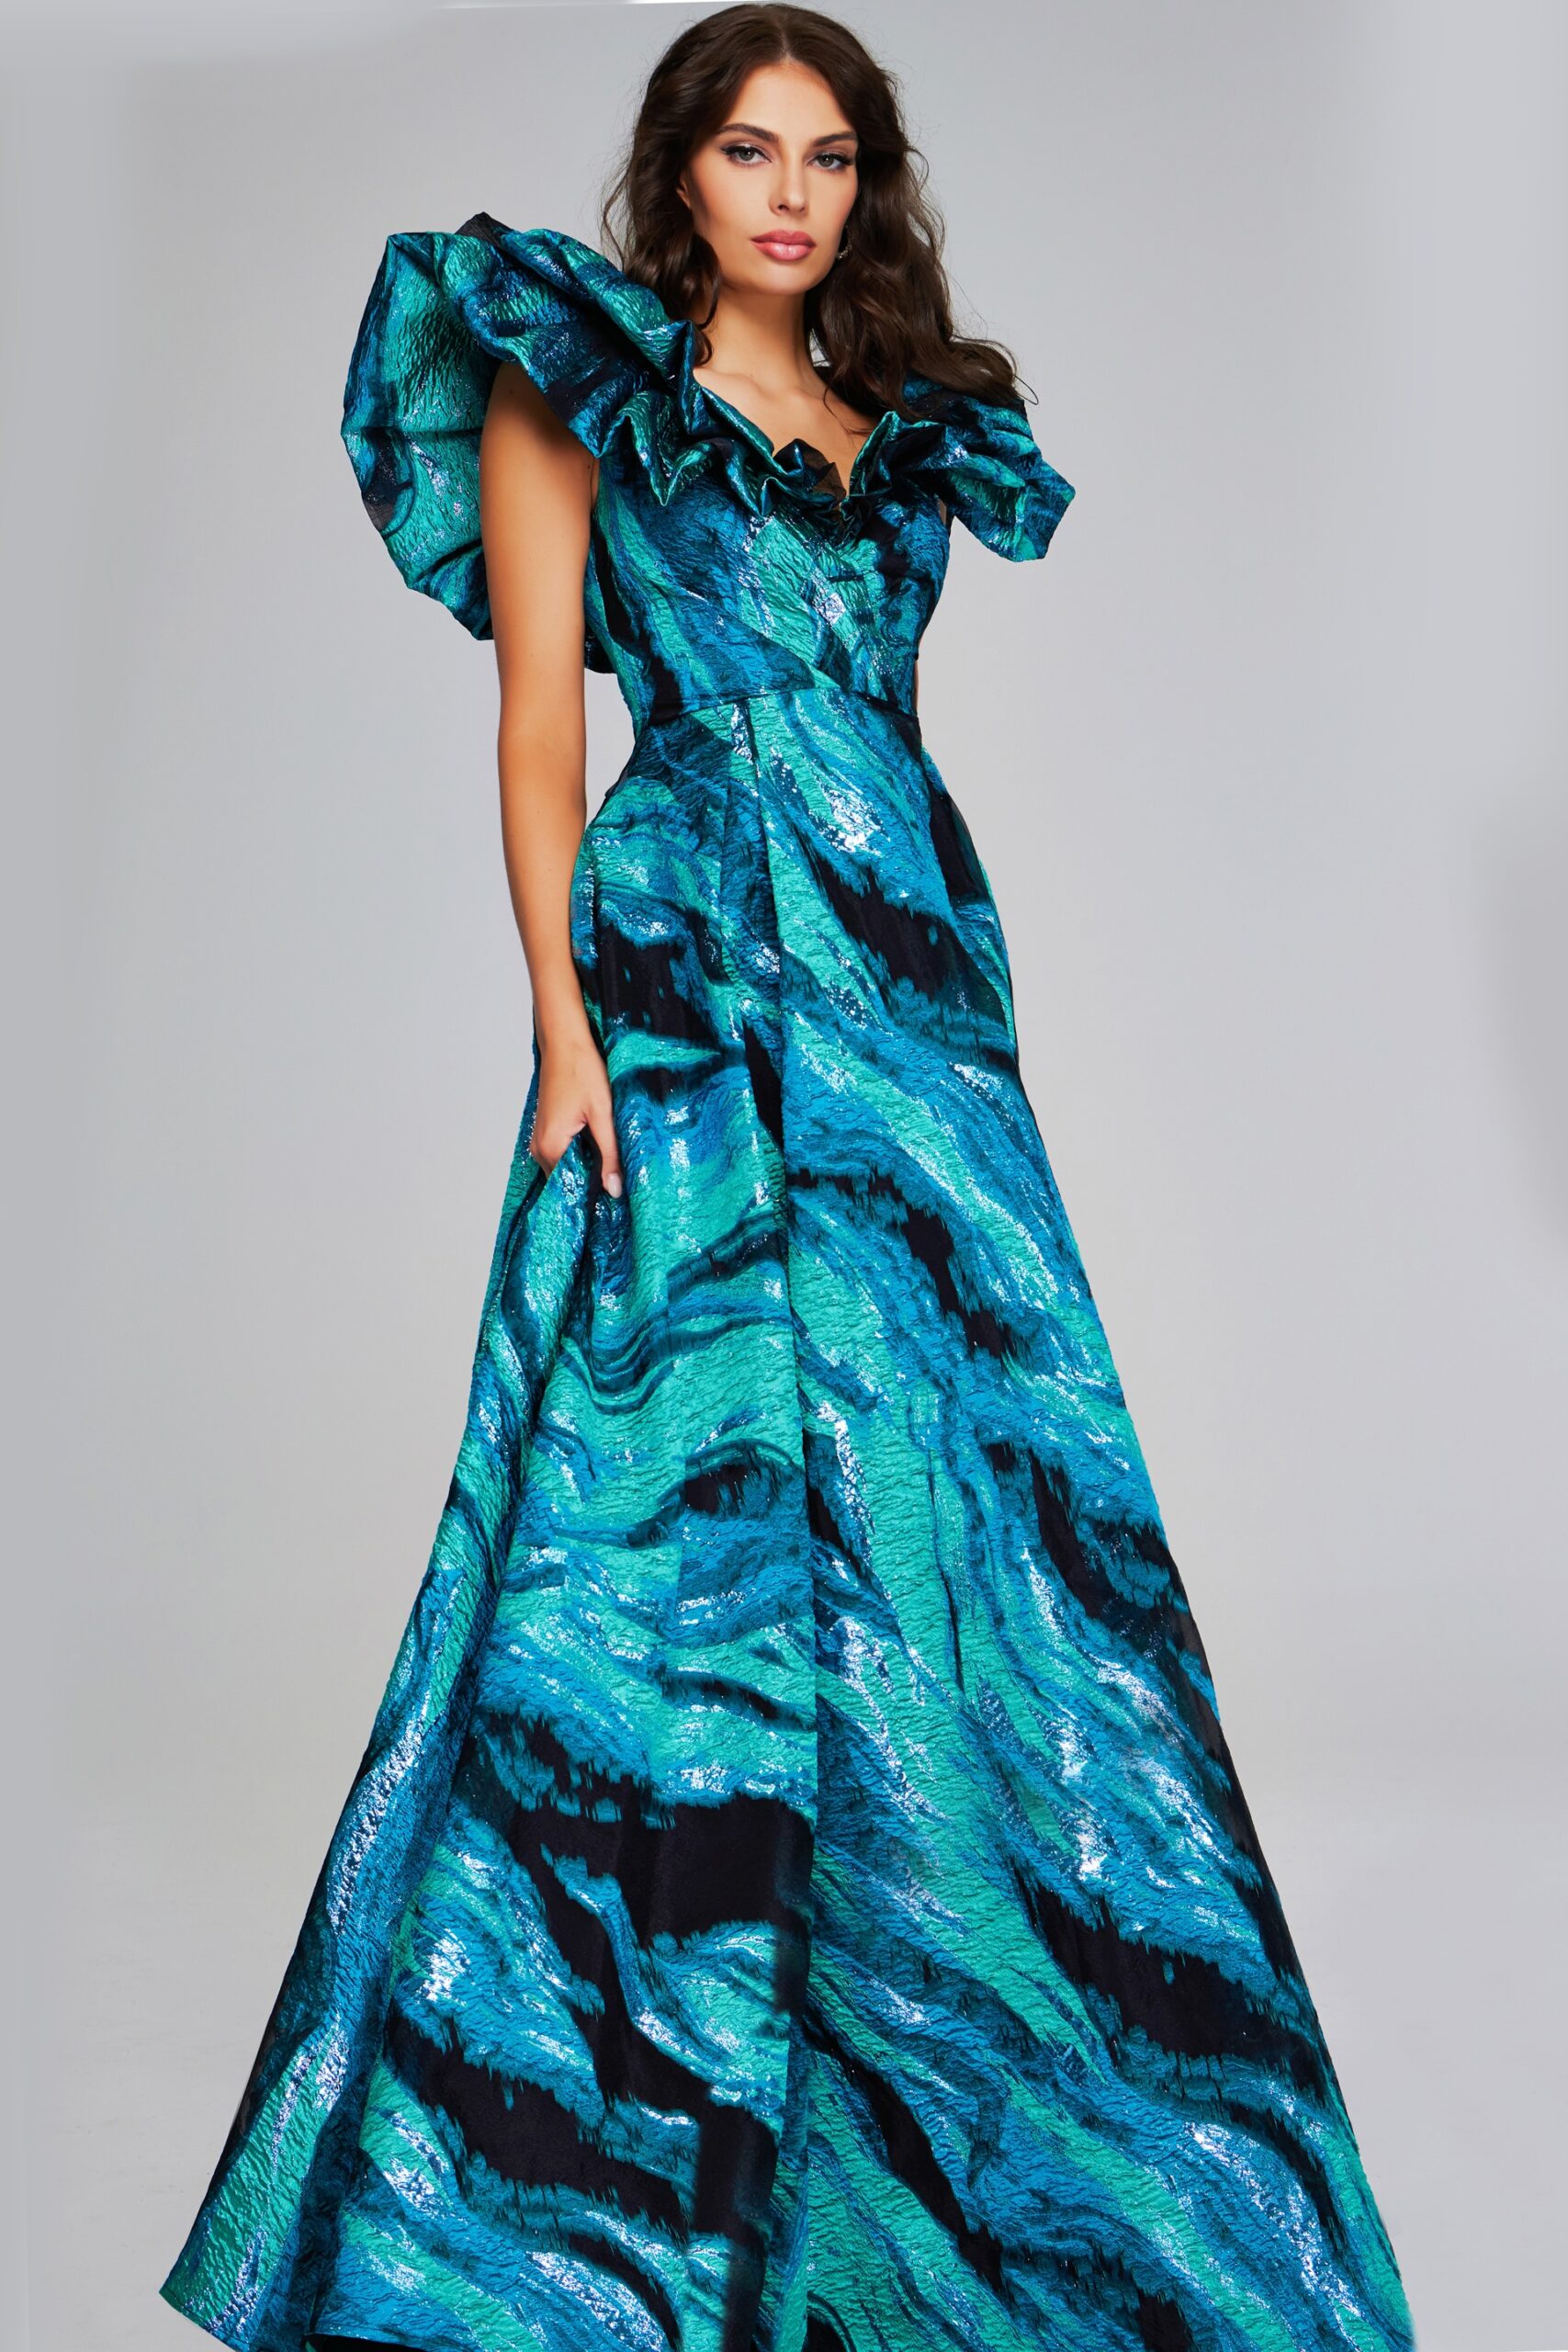 Model wearing Vibrant Teal Multi-Print Gown with Ruffled V-Neckline 40696